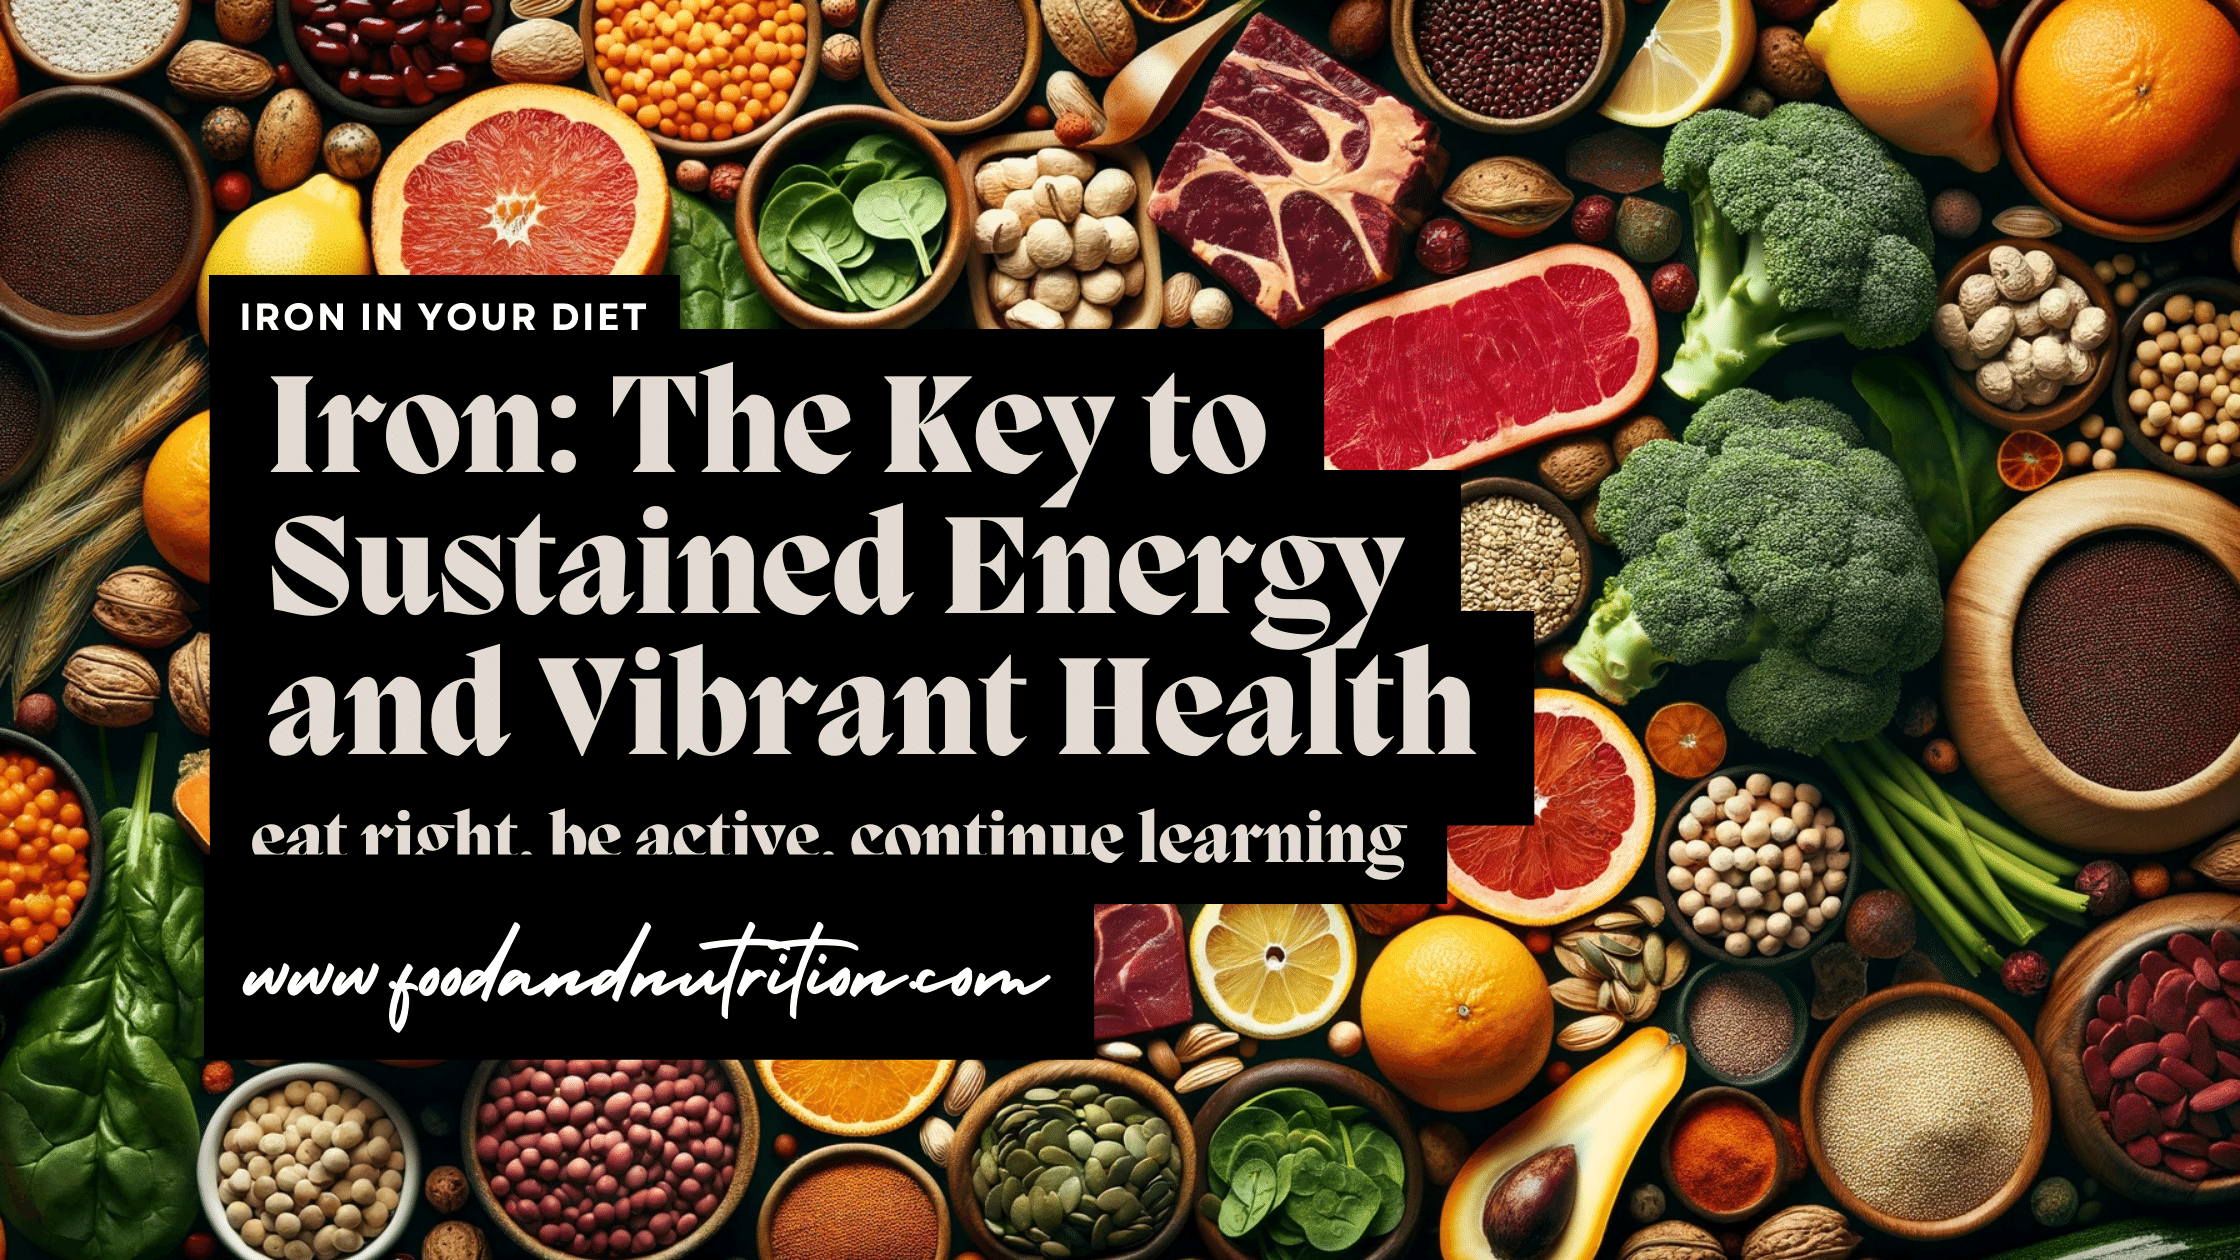 Iron: The Key to Sustained Energy and Vibrant Health